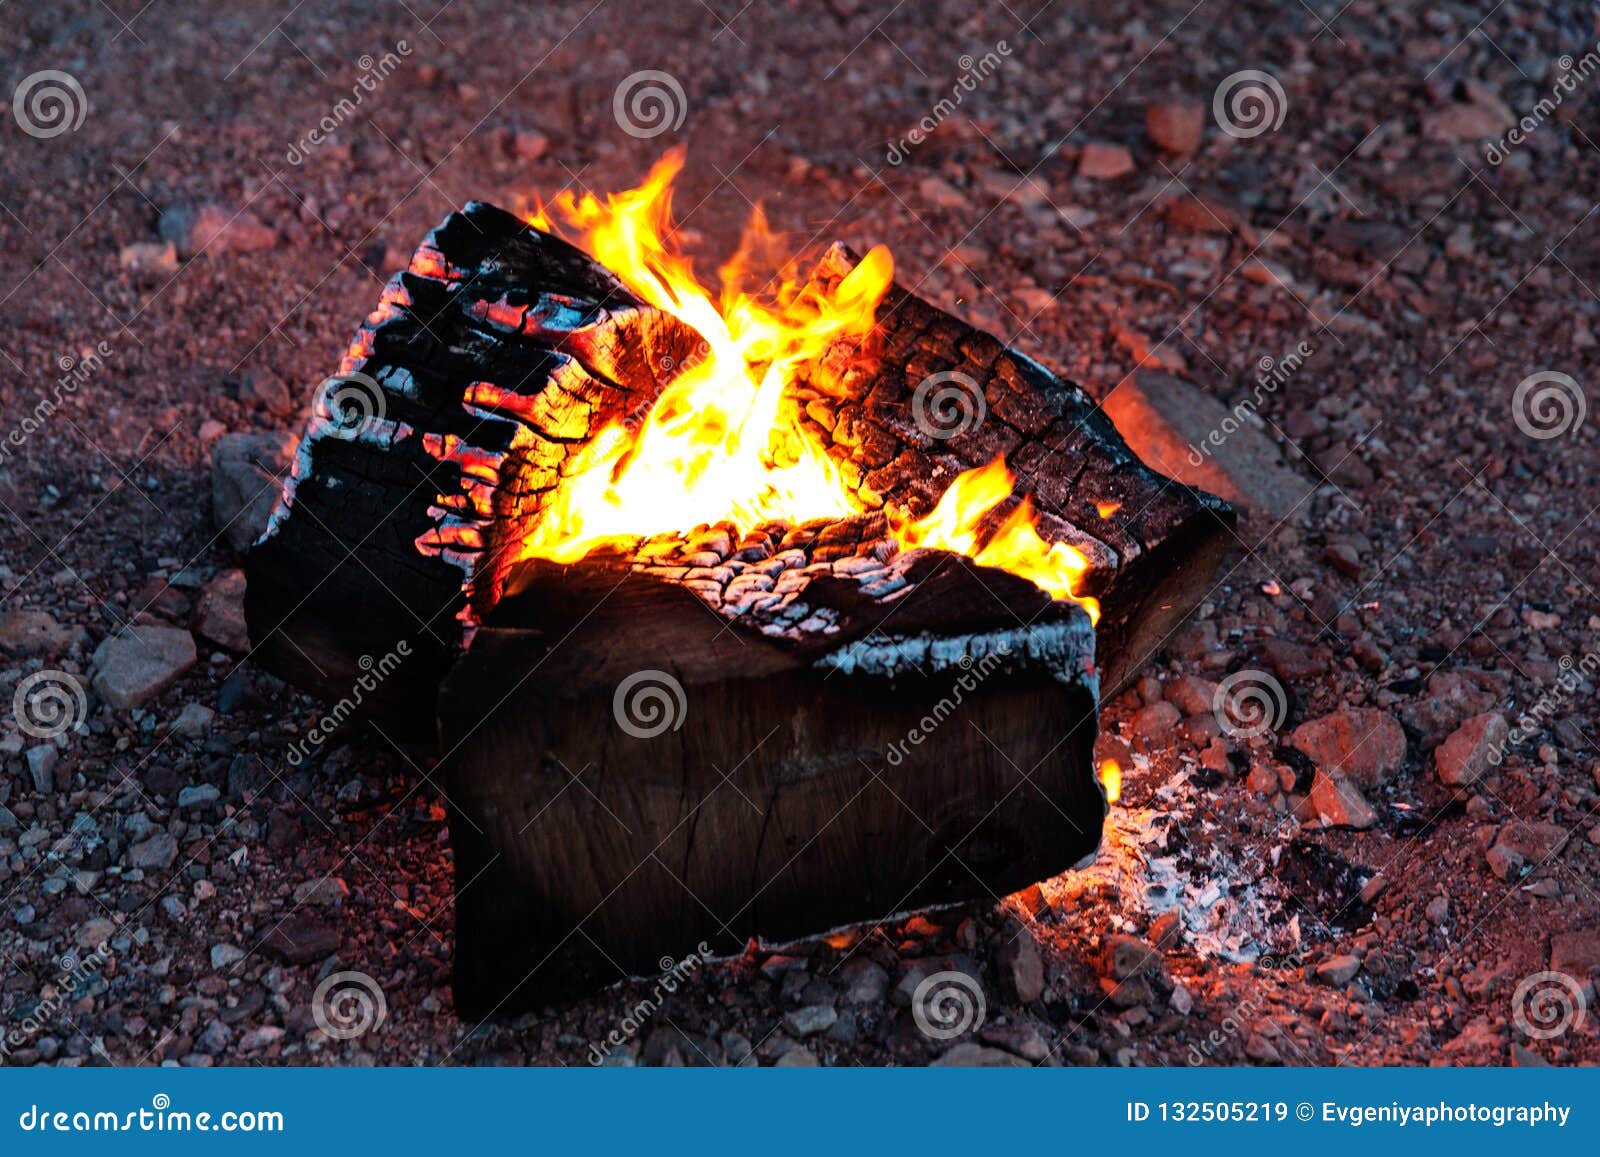 Warm Campfire Burning at Night on a Rocky Beach Stock Image - Image of ...